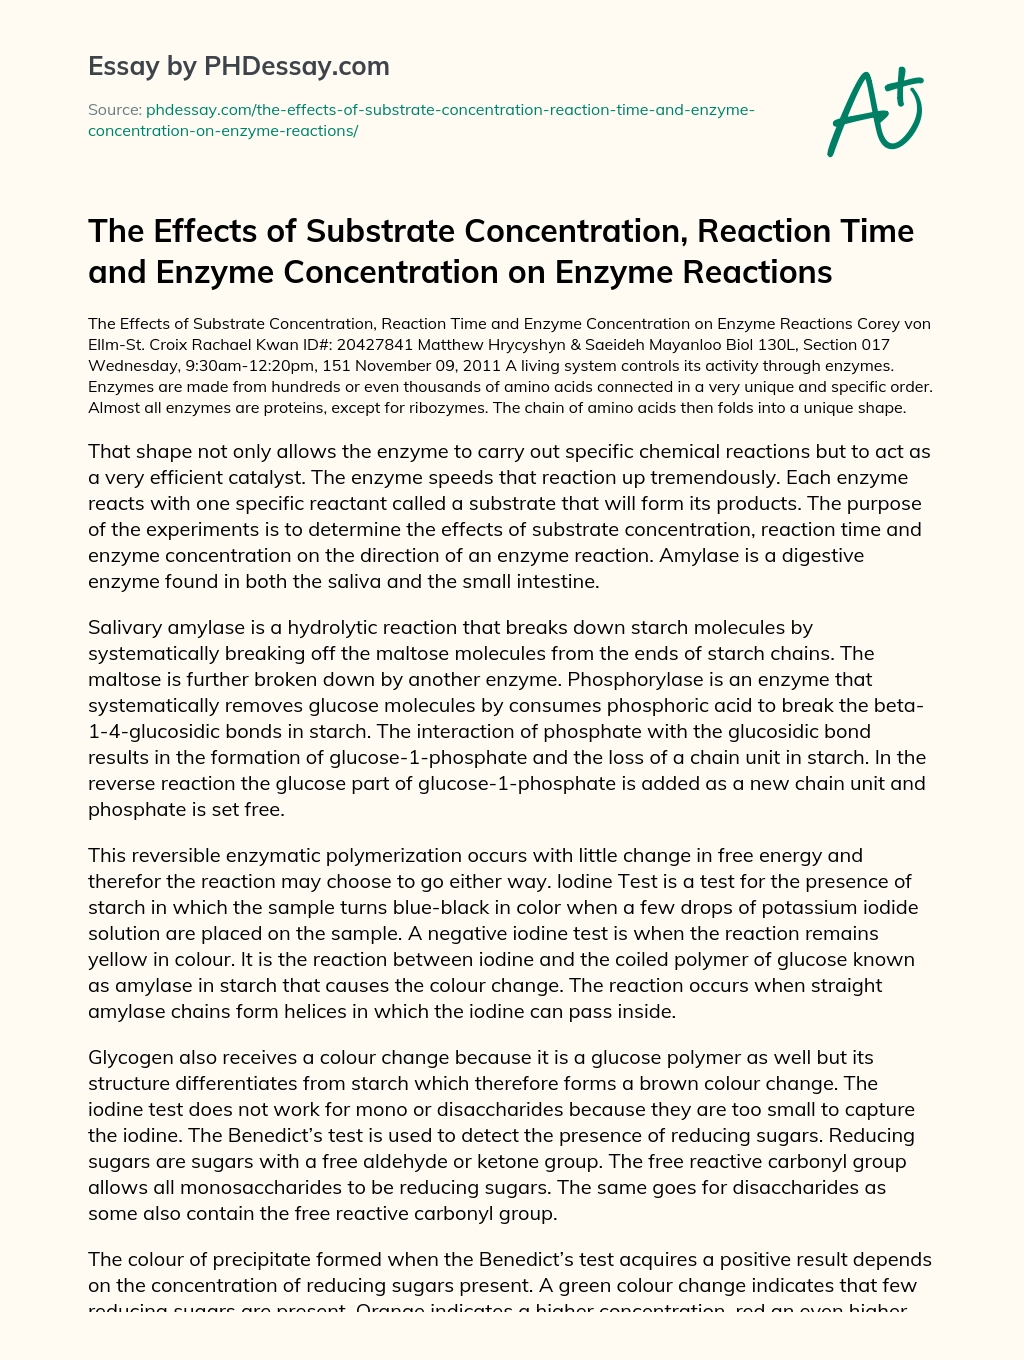 The Effects of Substrate Concentration, Reaction Time and Enzyme Concentration on Enzyme Reactions essay